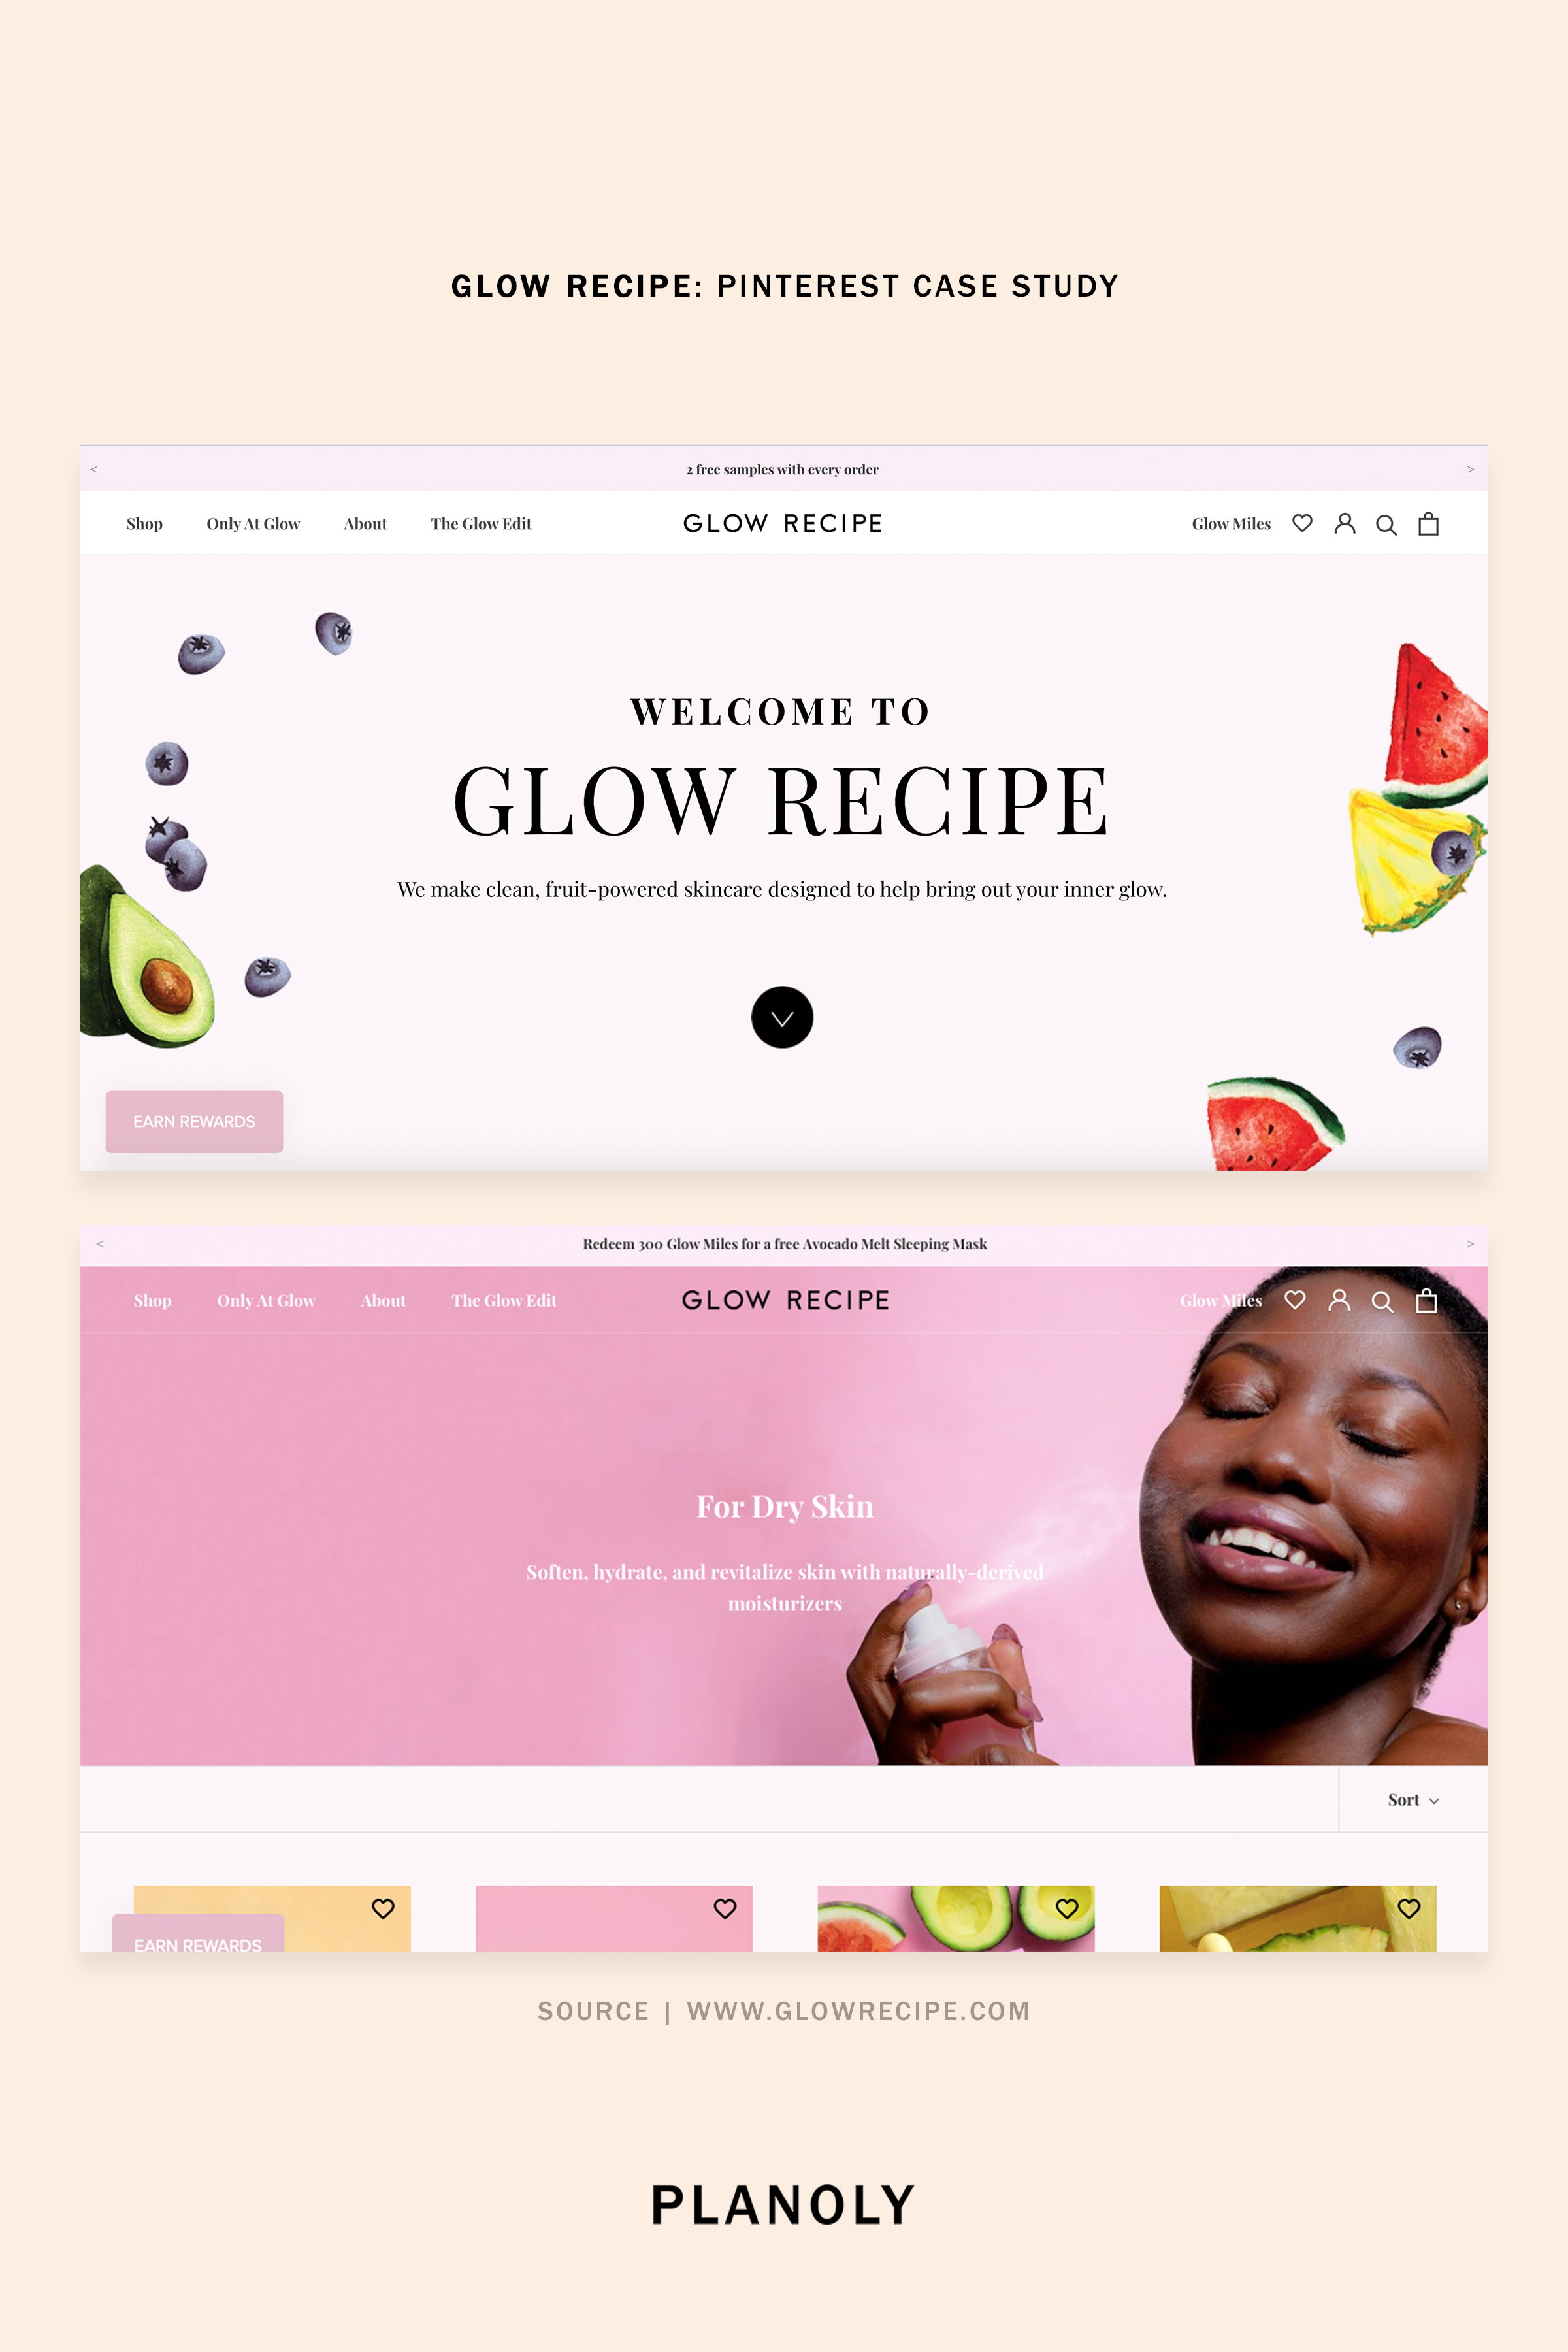 Case Study: How Glow Recipe Uses Pinterest to Build Brand Awareness